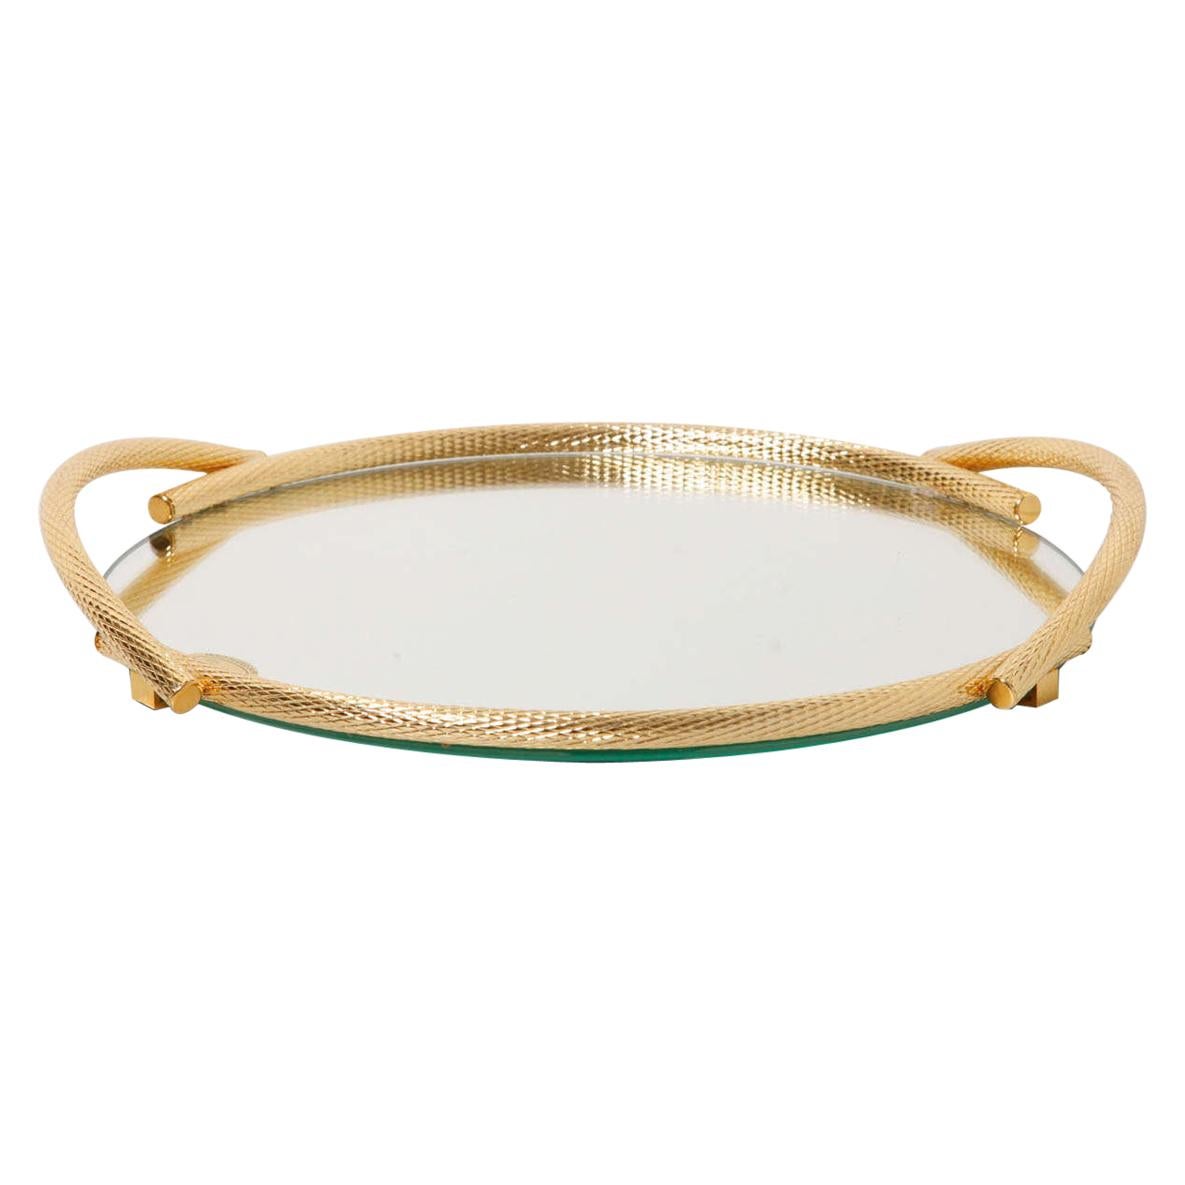 Gold Plated 24kt Service Tray Designed by Dimart, Italy